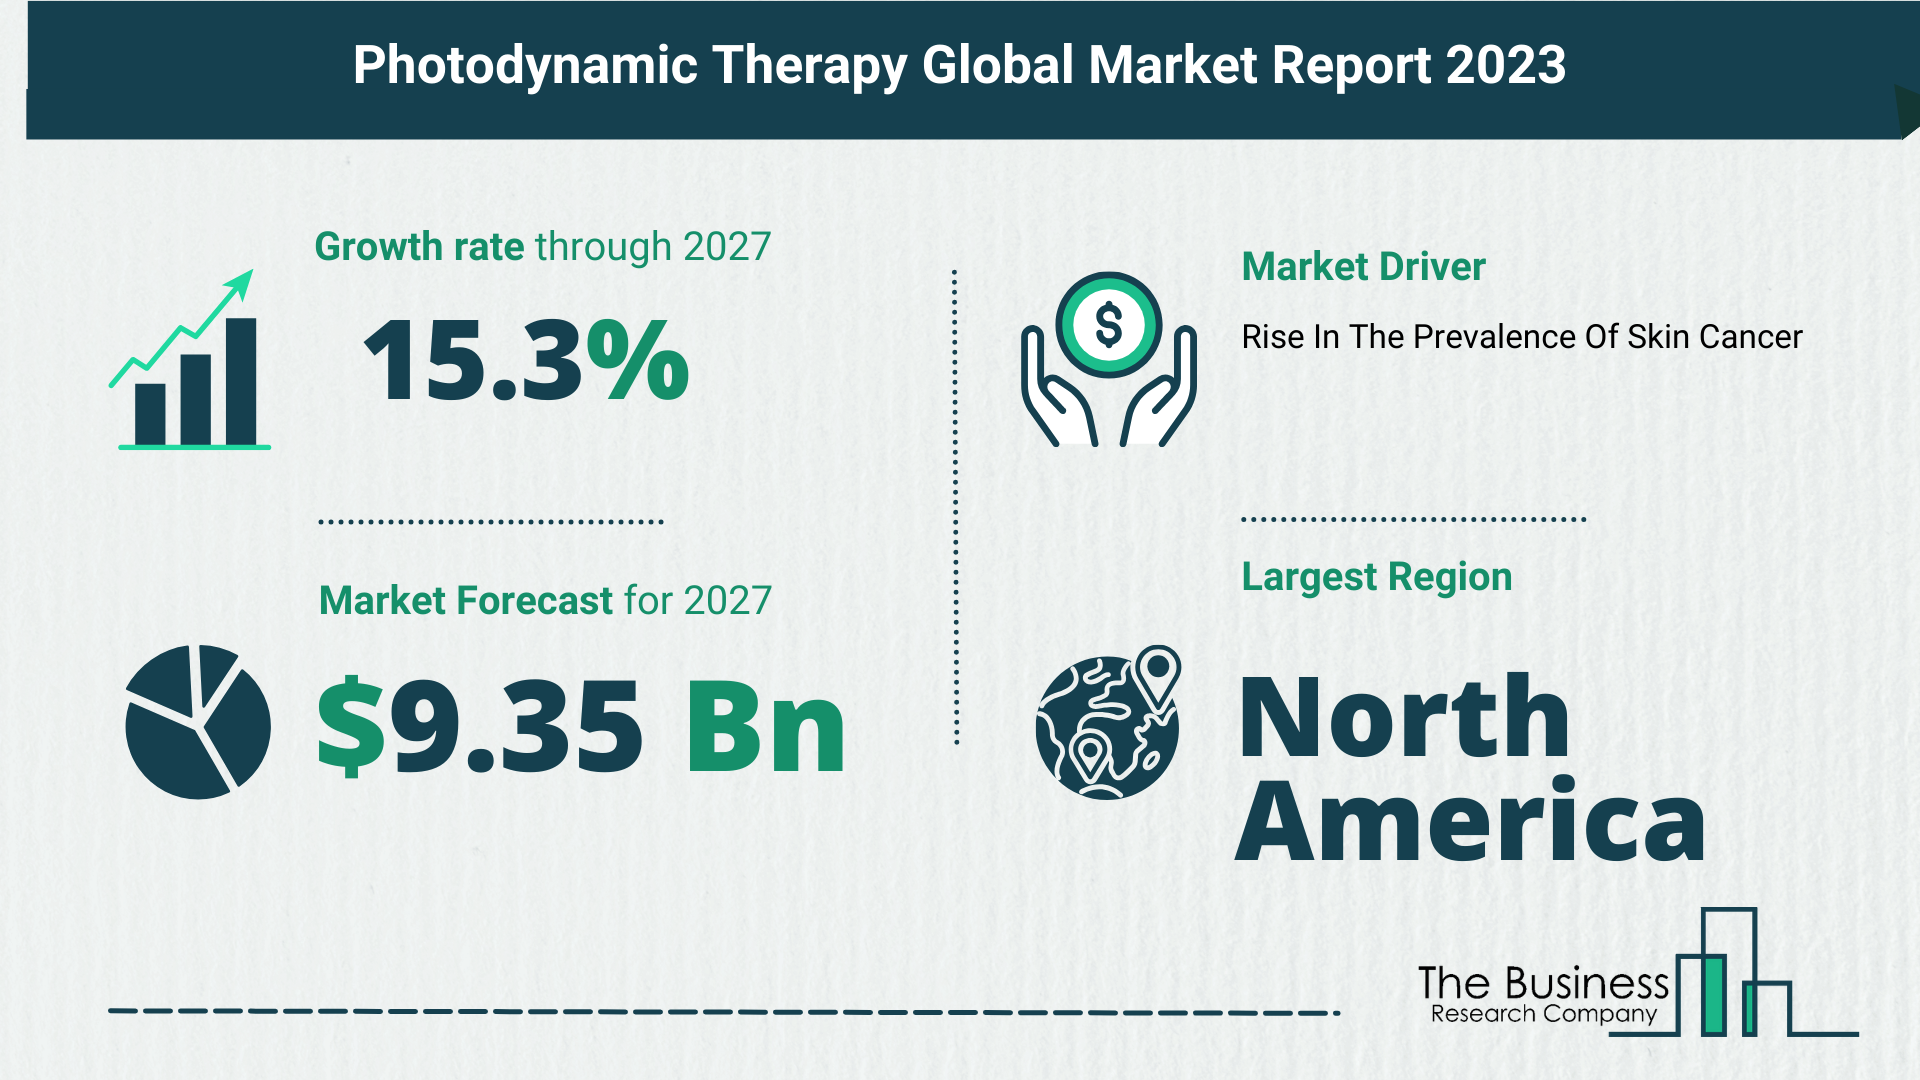 Global Photodynamic Therapy Market Analysis 2023: Size, Share, And Key Trends